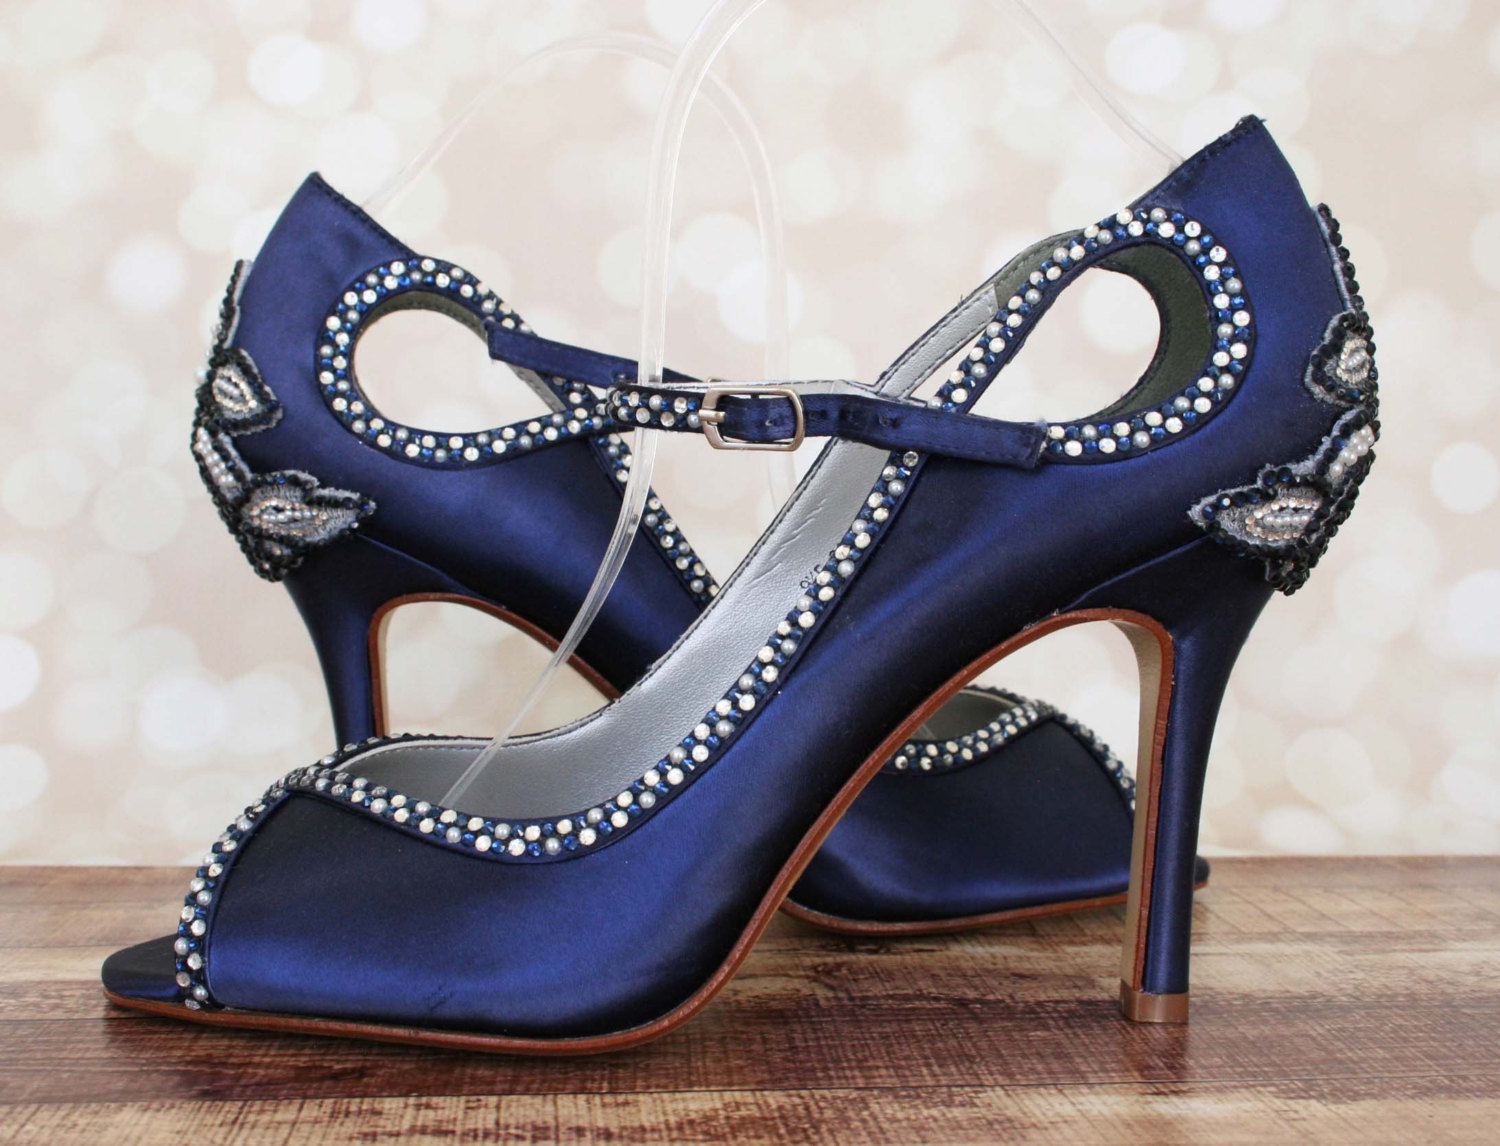 Jeweled Wedding Shoes for the Bride - Ellie Wren Shoes